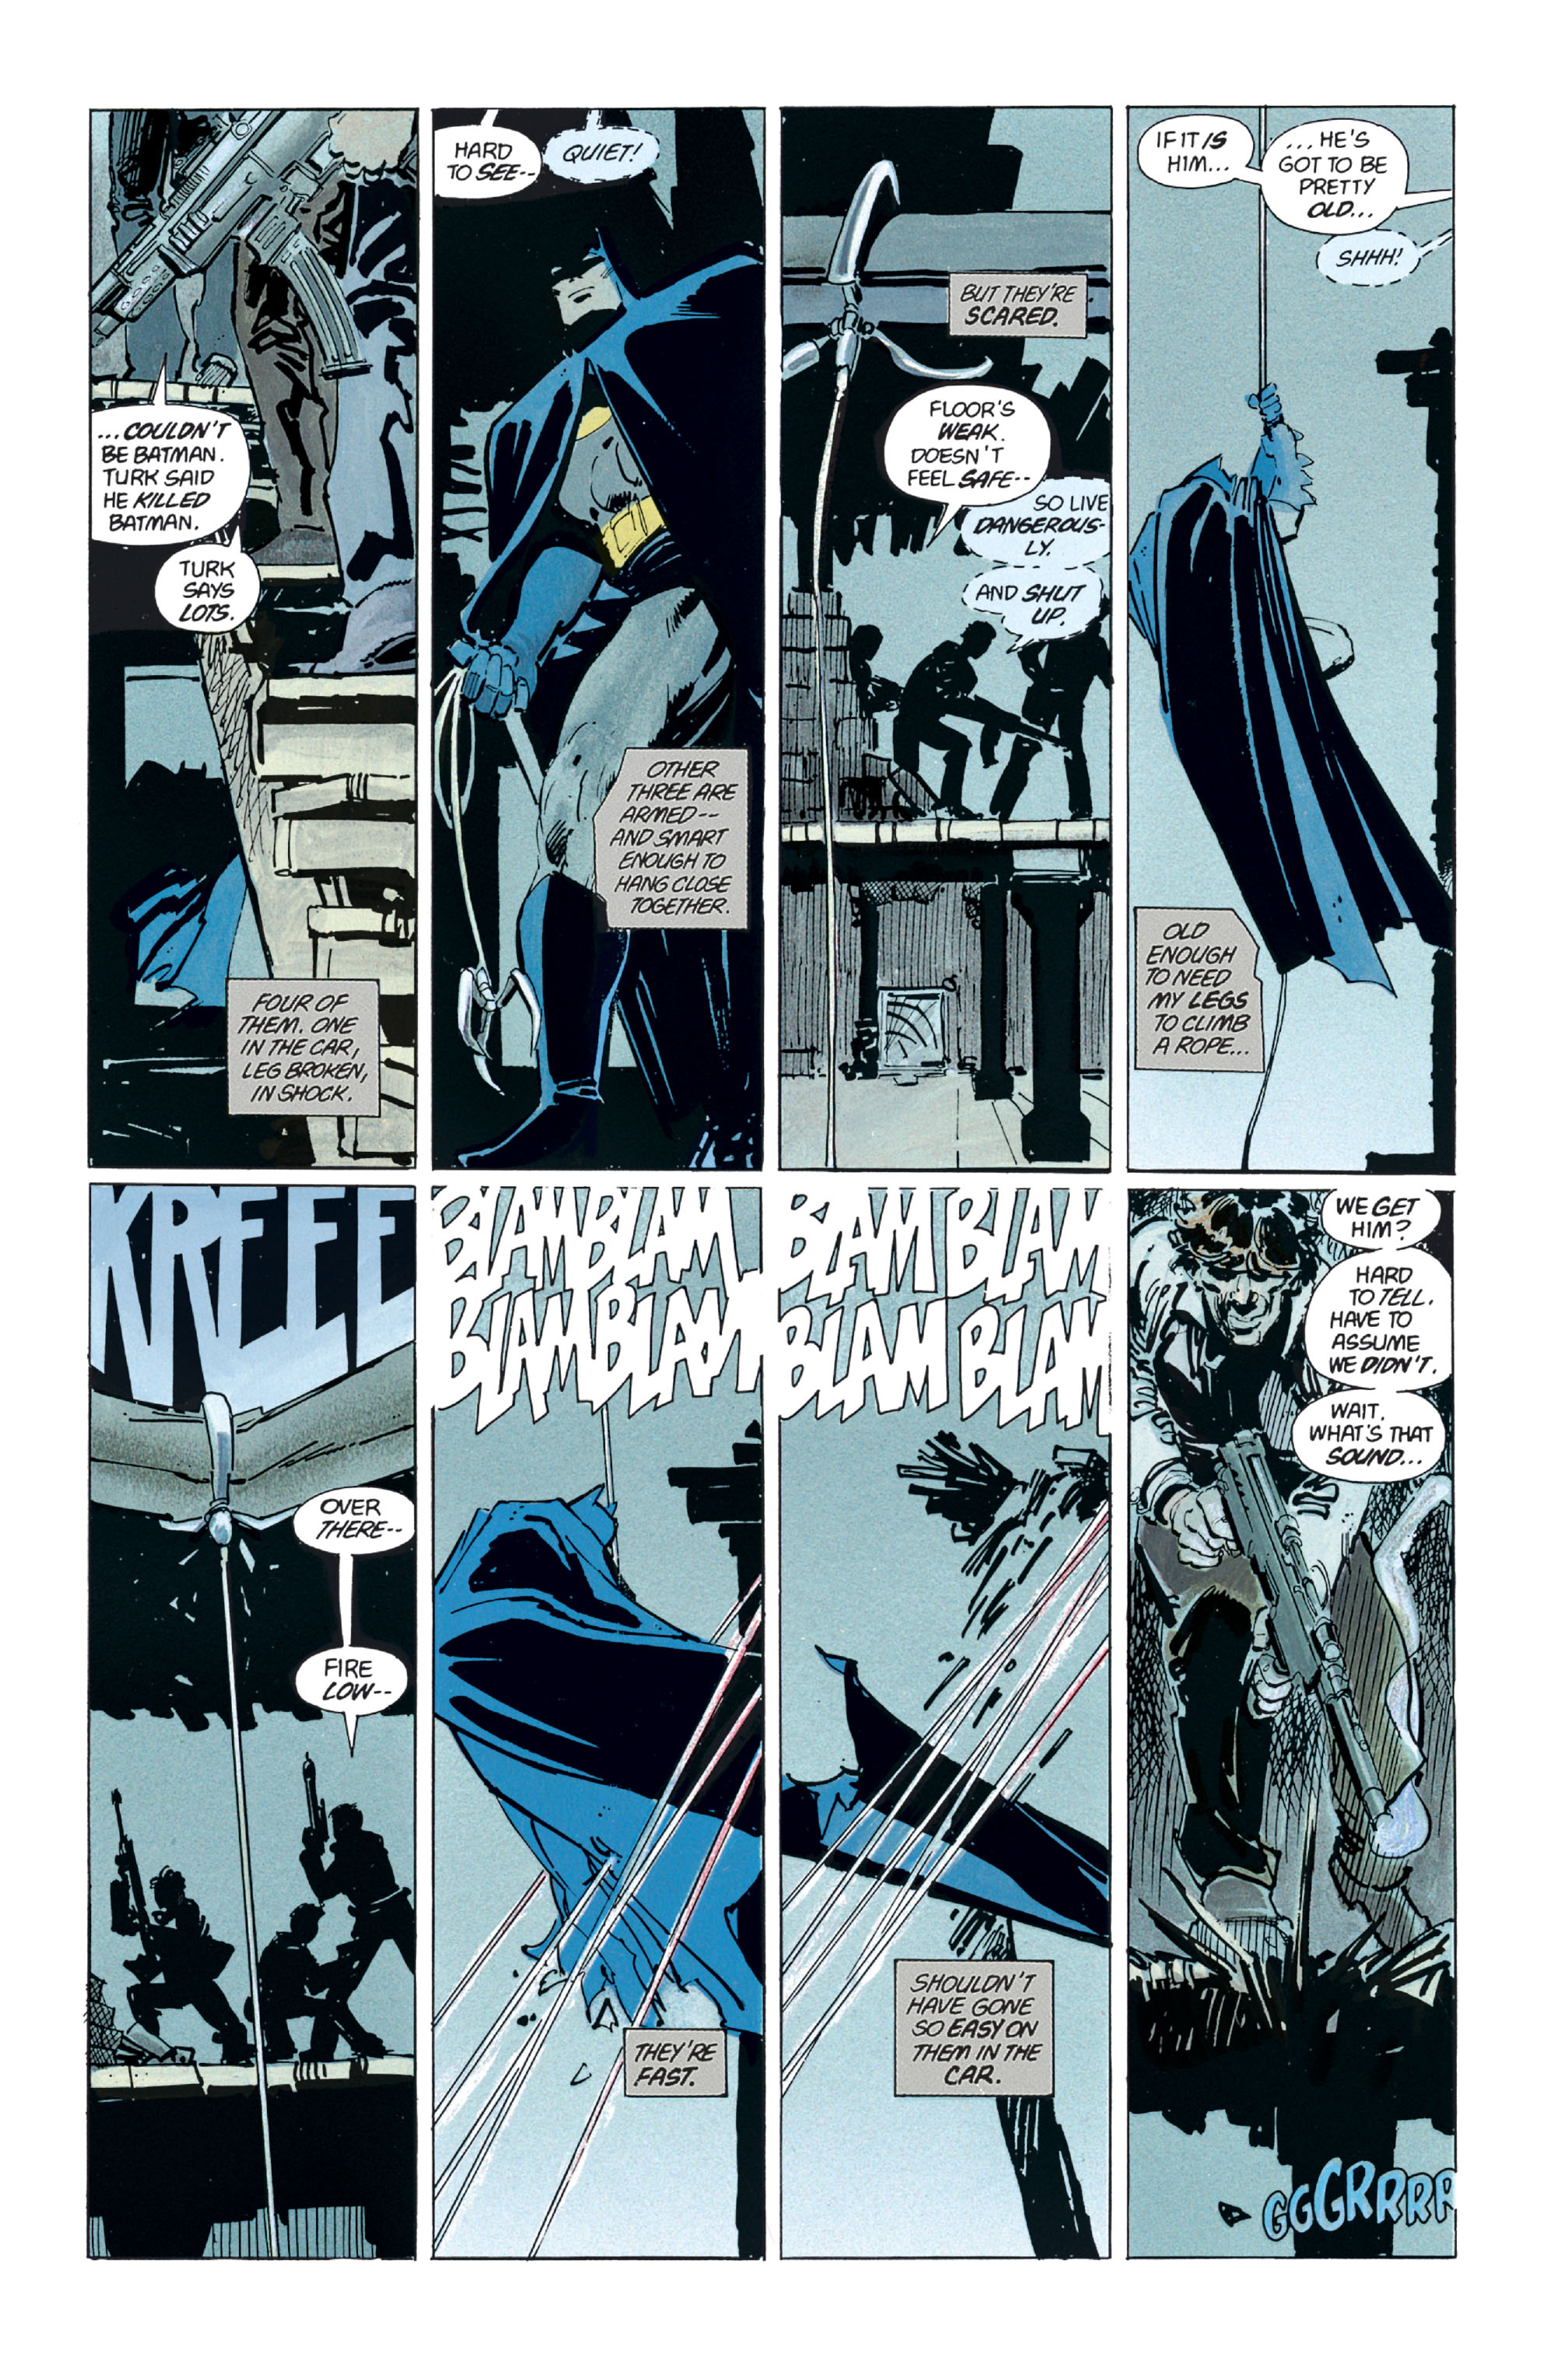 Batman The Dark Knight Returns Issue 1 | Read Batman The Dark Knight Returns  Issue 1 comic online in high quality. Read Full Comic online for free -  Read comics online in